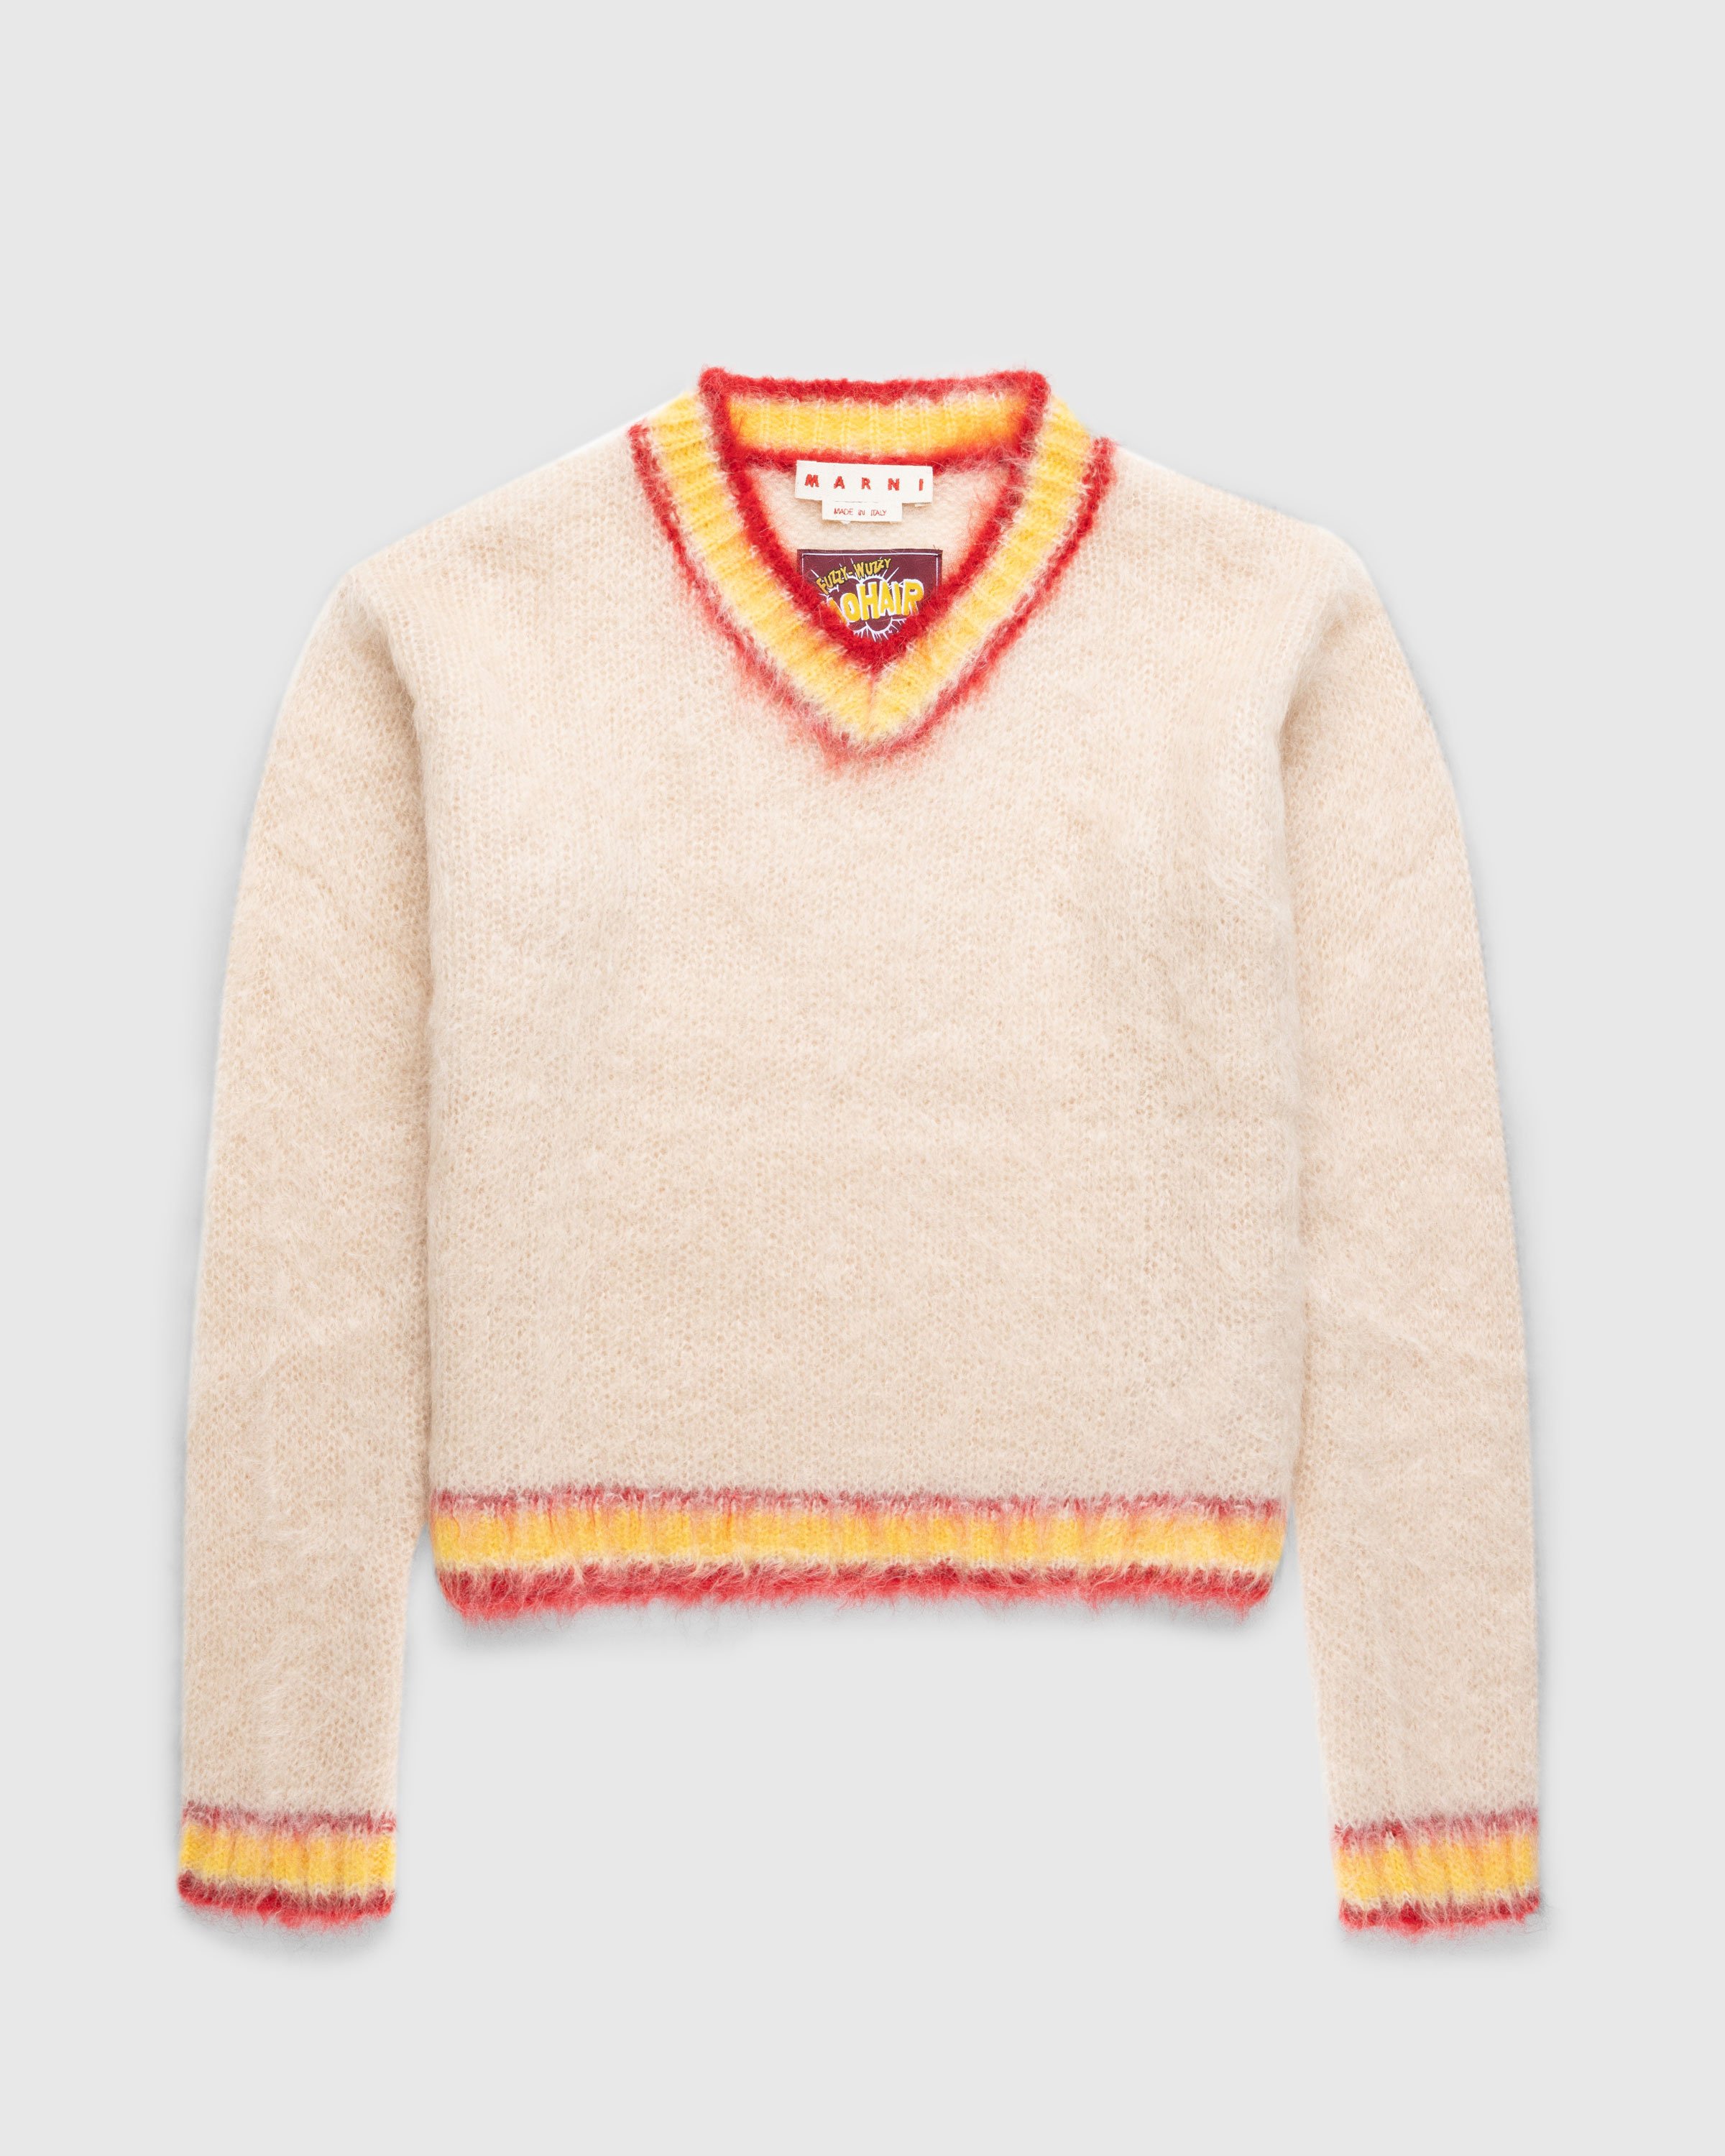 Marni - Mohair Sweater Beige Multi - Clothing - Pink - Image 1